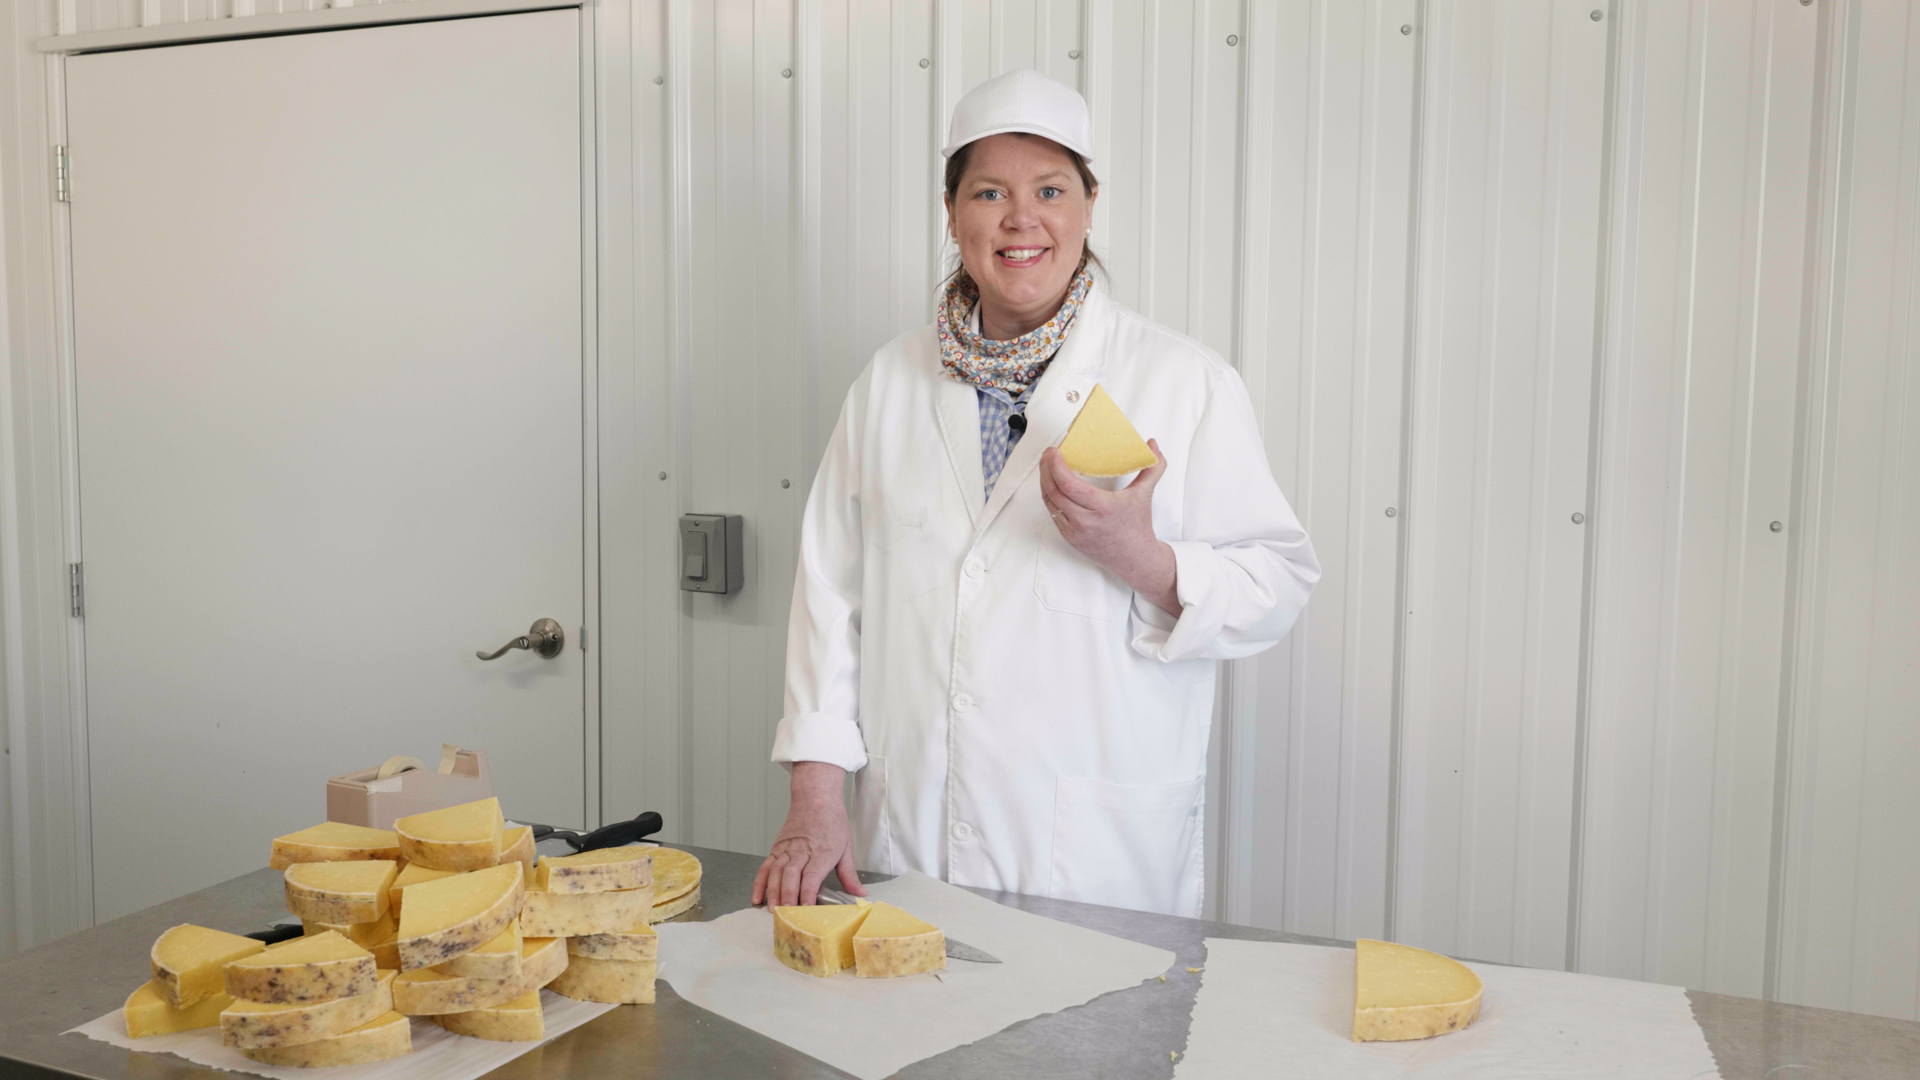 Inga Witscher holds a wedge of cheese.